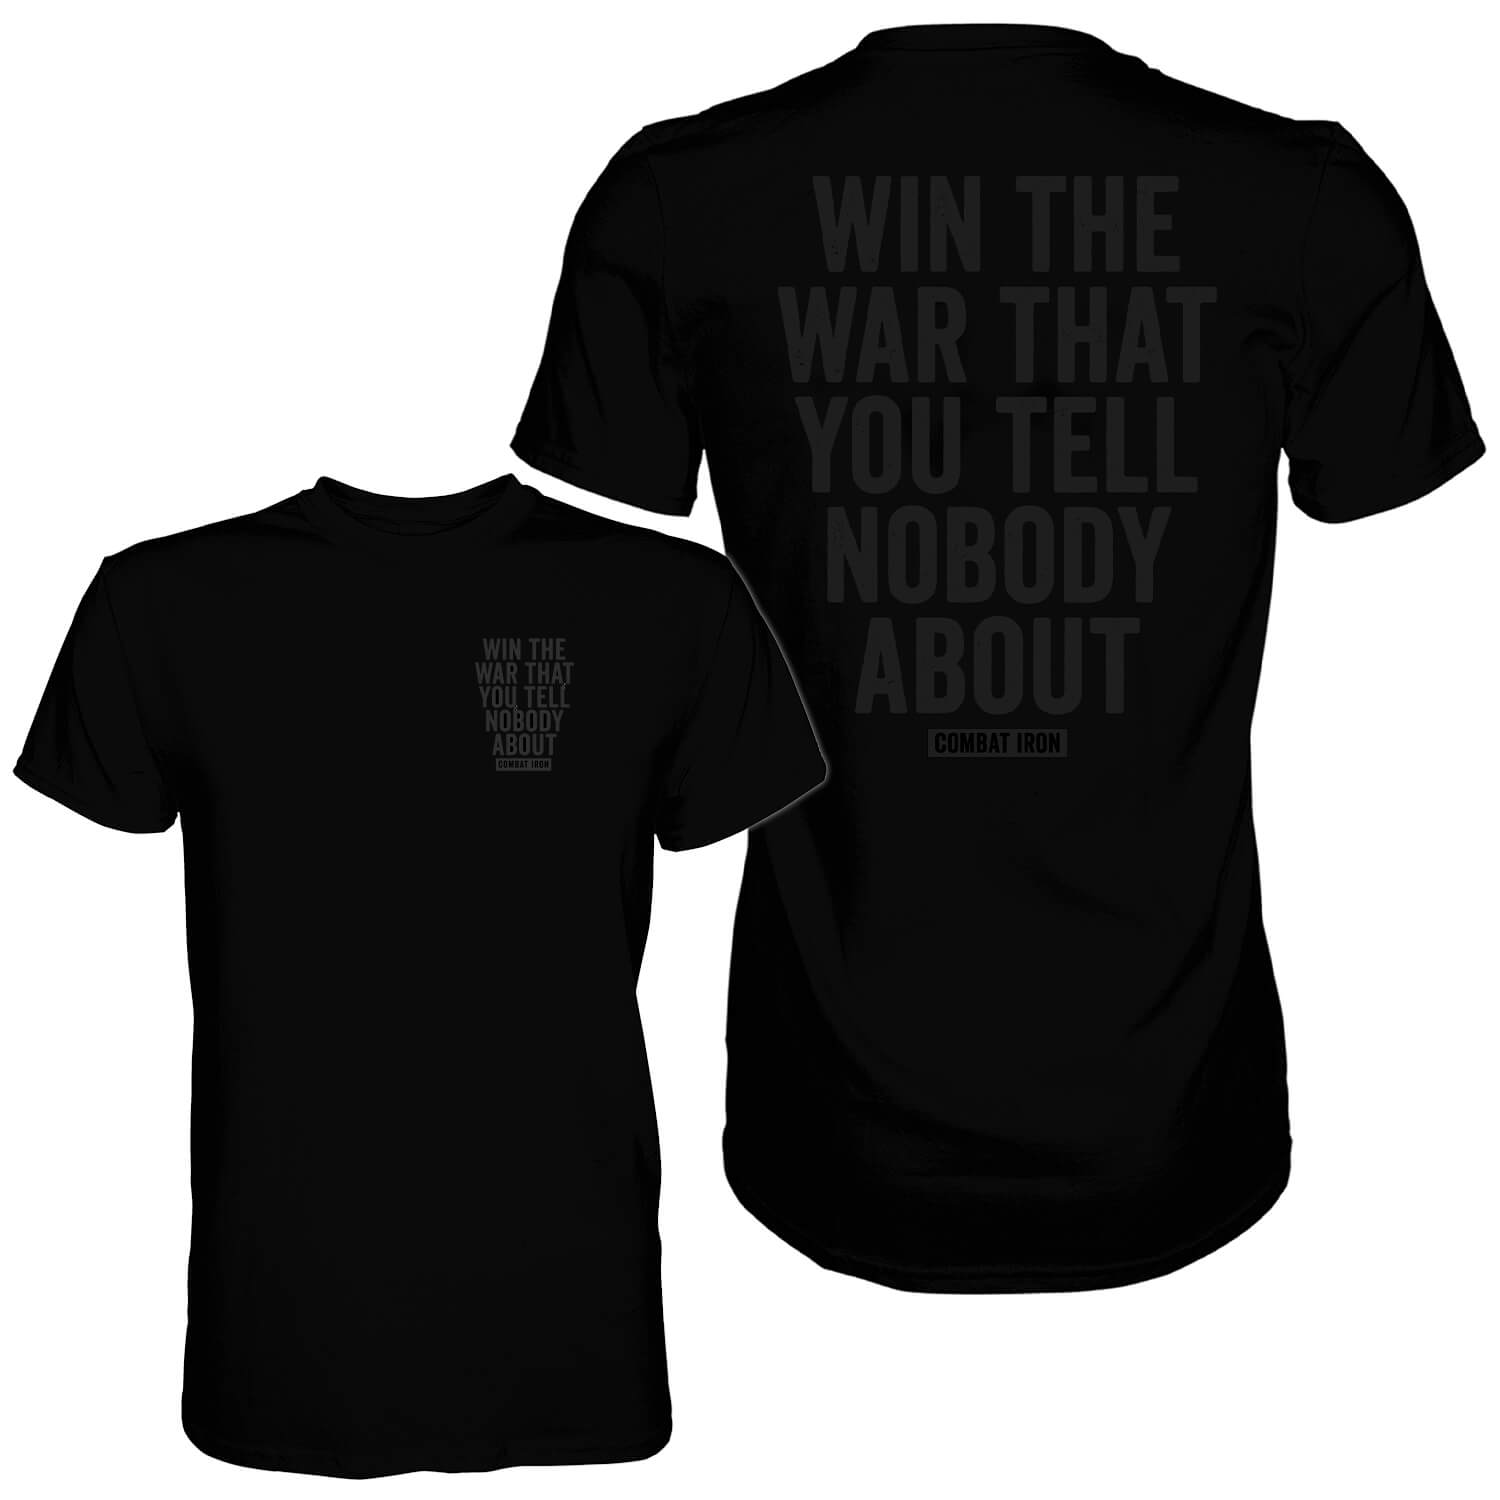 WIN THE WAR THAT YOU TELL NOBODY ABOUT MEN'S T-SHIRT